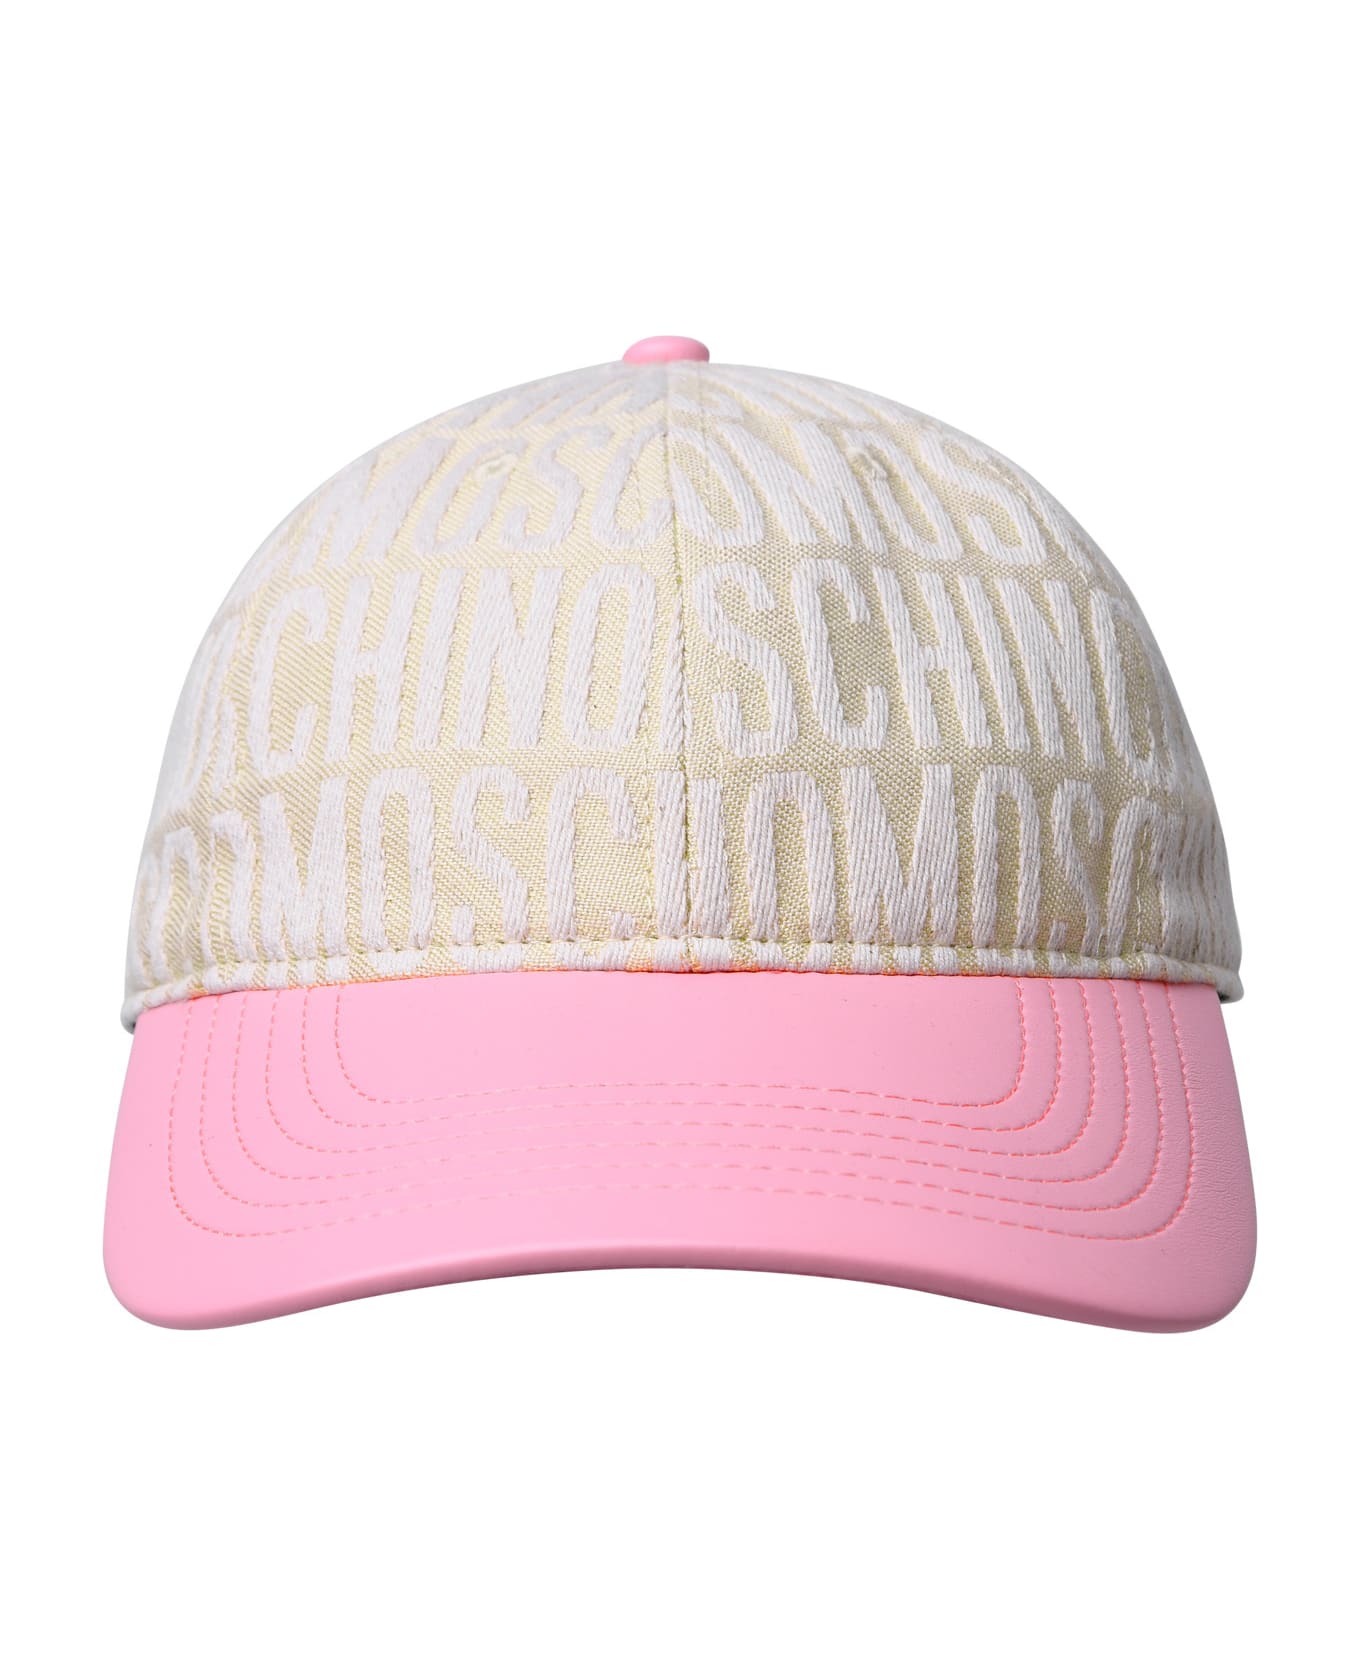 Moschino Hat In Ivory Cotton Blend - Ivory